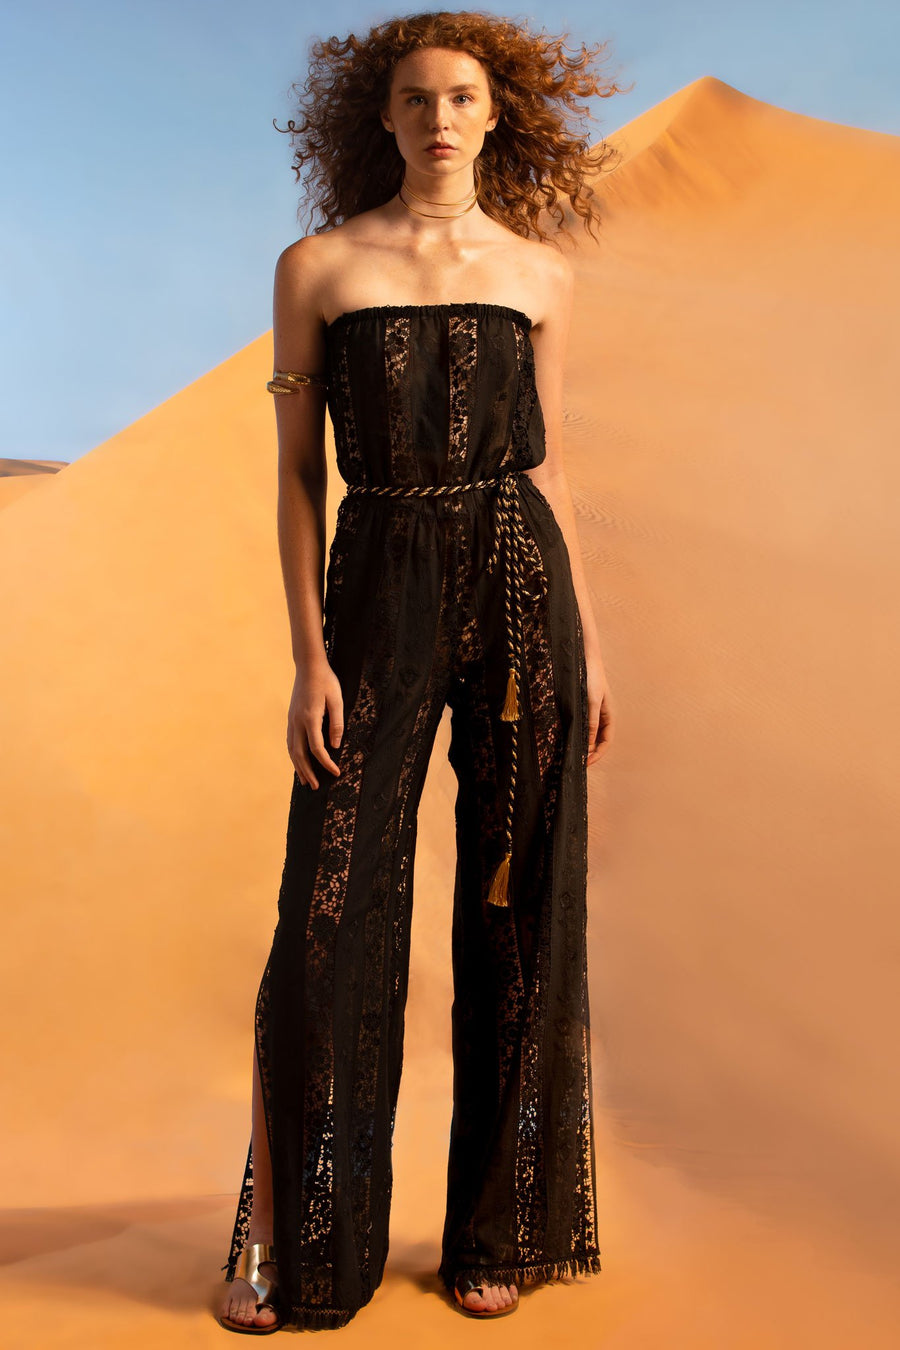 This is a photo of a woman wearing a strapless black cotton and lace embroidered jumpsuit. It has an elastic waistline and side leg slits. The hemline is finished with black fringe and the model wears a gold and black metallic belt around the waist.